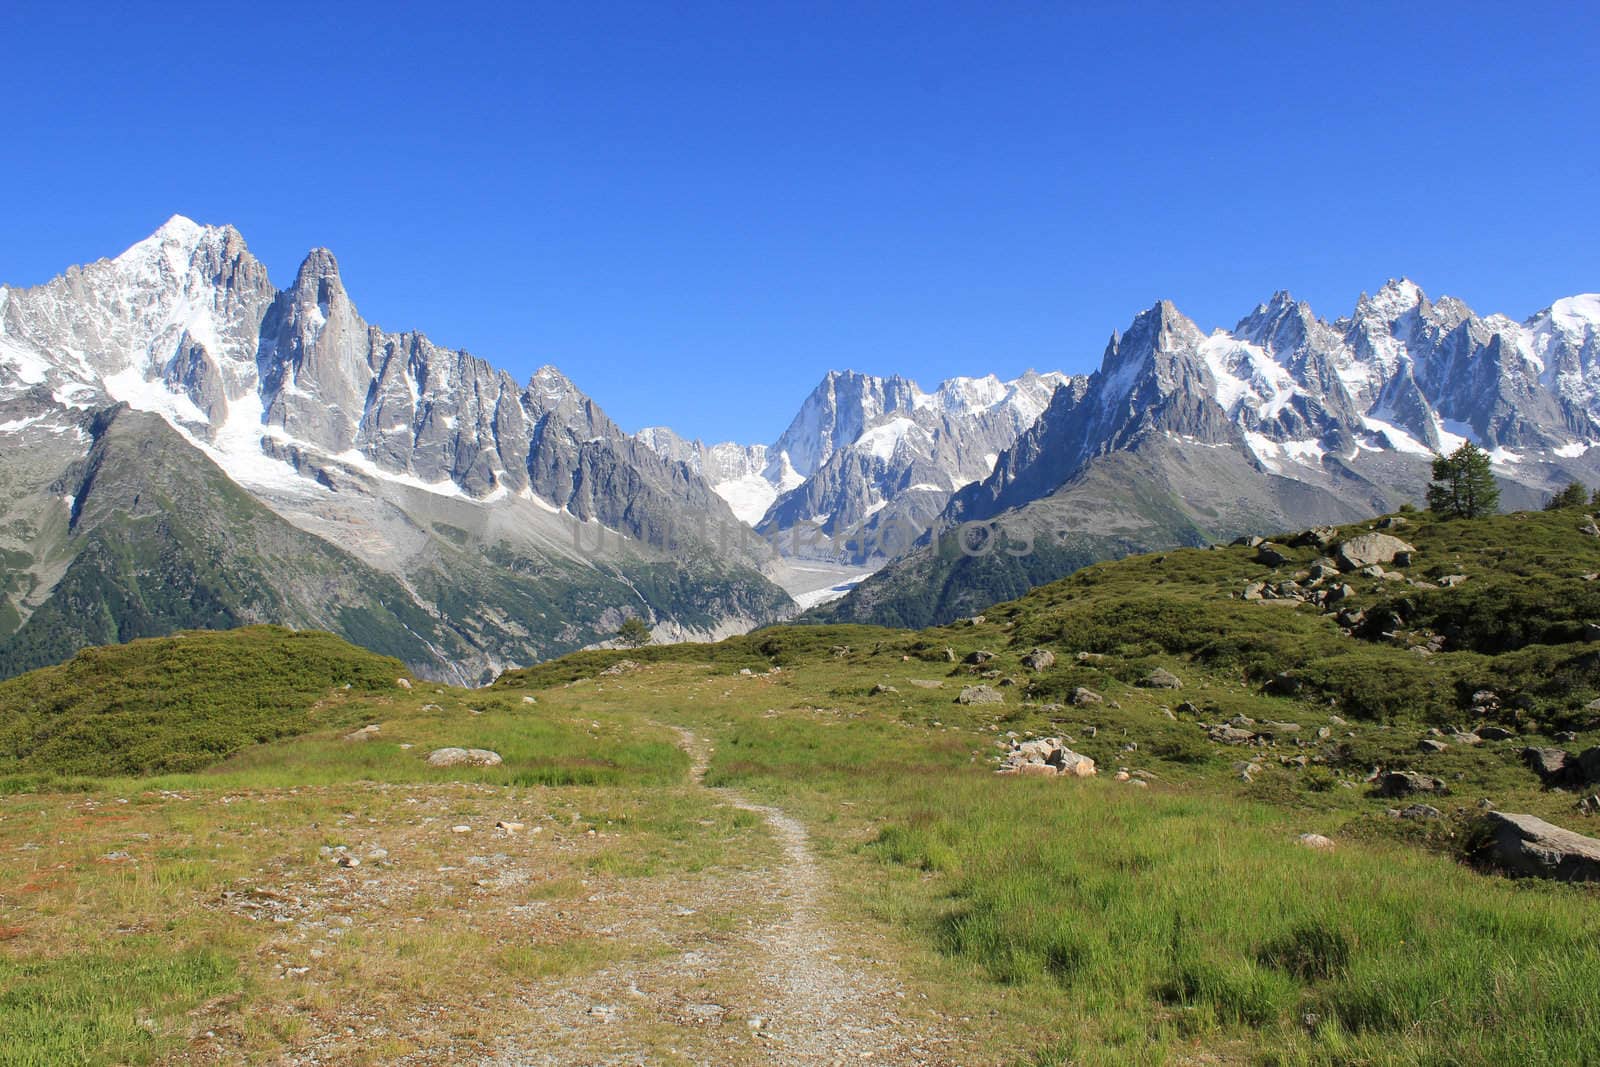 View of the Mont-Blanc massif from a small path in the mountain, France, by beautiful weather